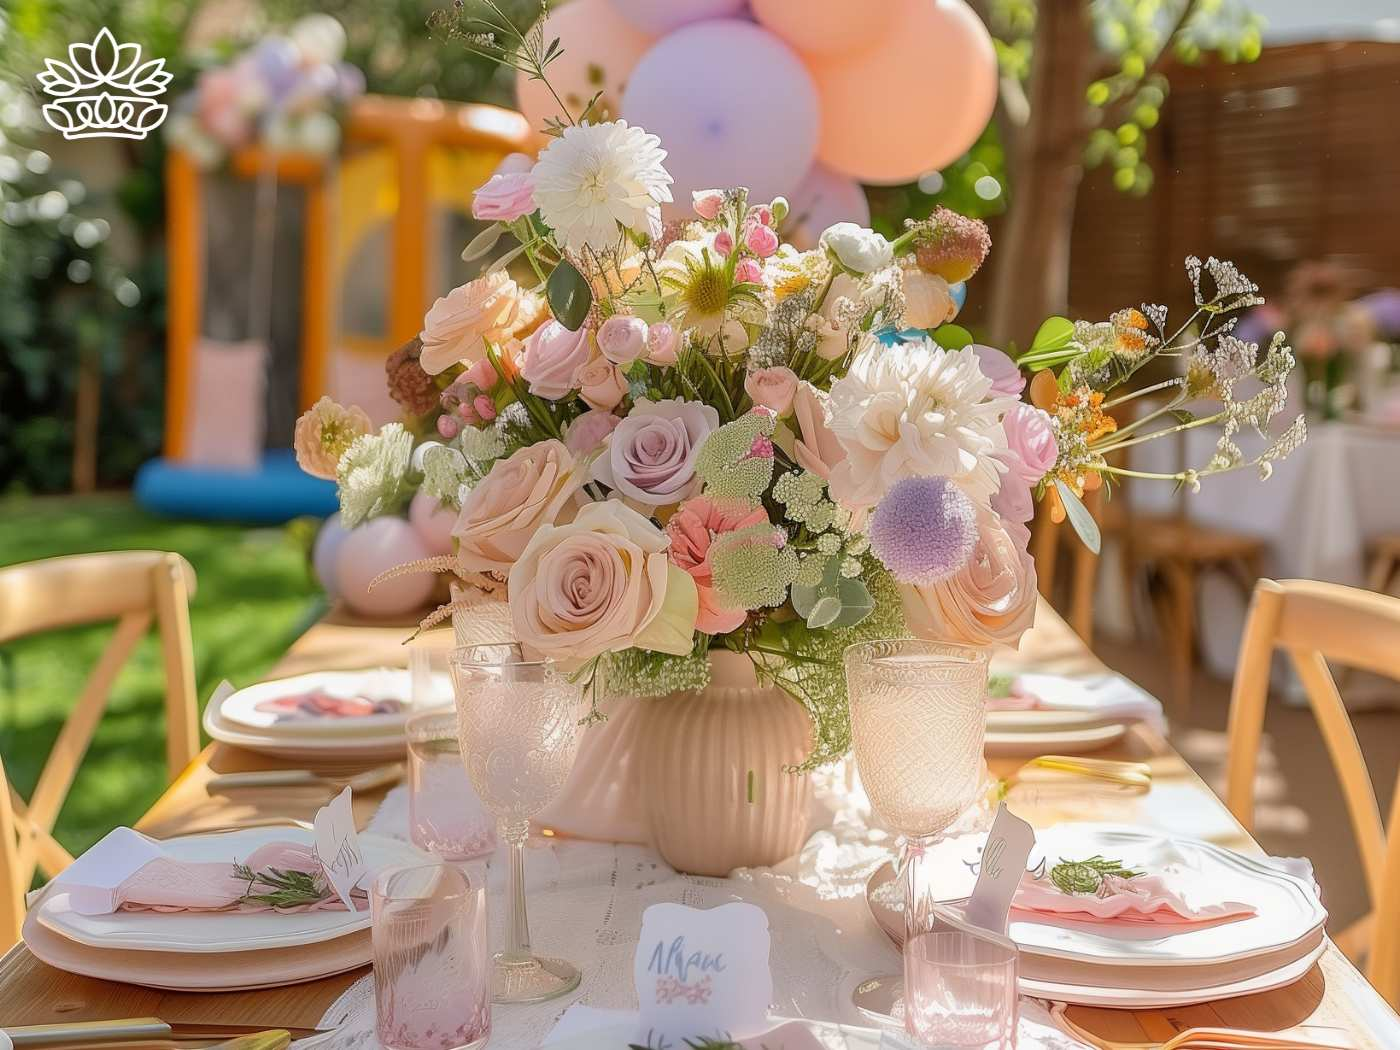 A sumptuous garden party setting with a floral centrepiece in pastel tones, elegant tableware, and soft pink balloons, all contributing to the Fabulous Flowers and Gifts ambiance.